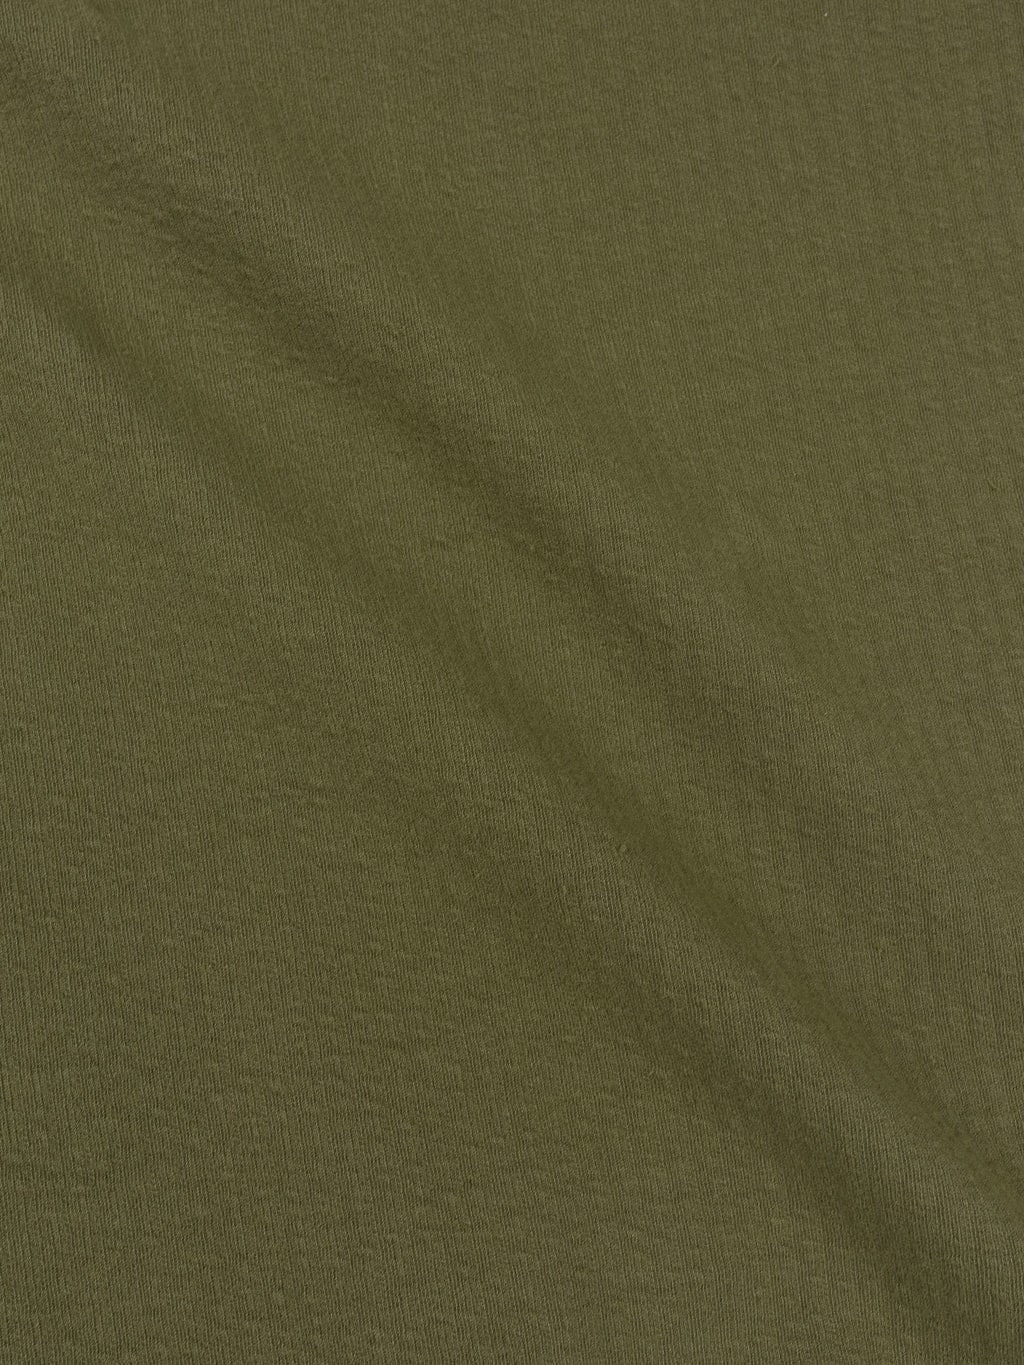 Loop Weft Double Face Jacquard crewneck Thermal army olive texture